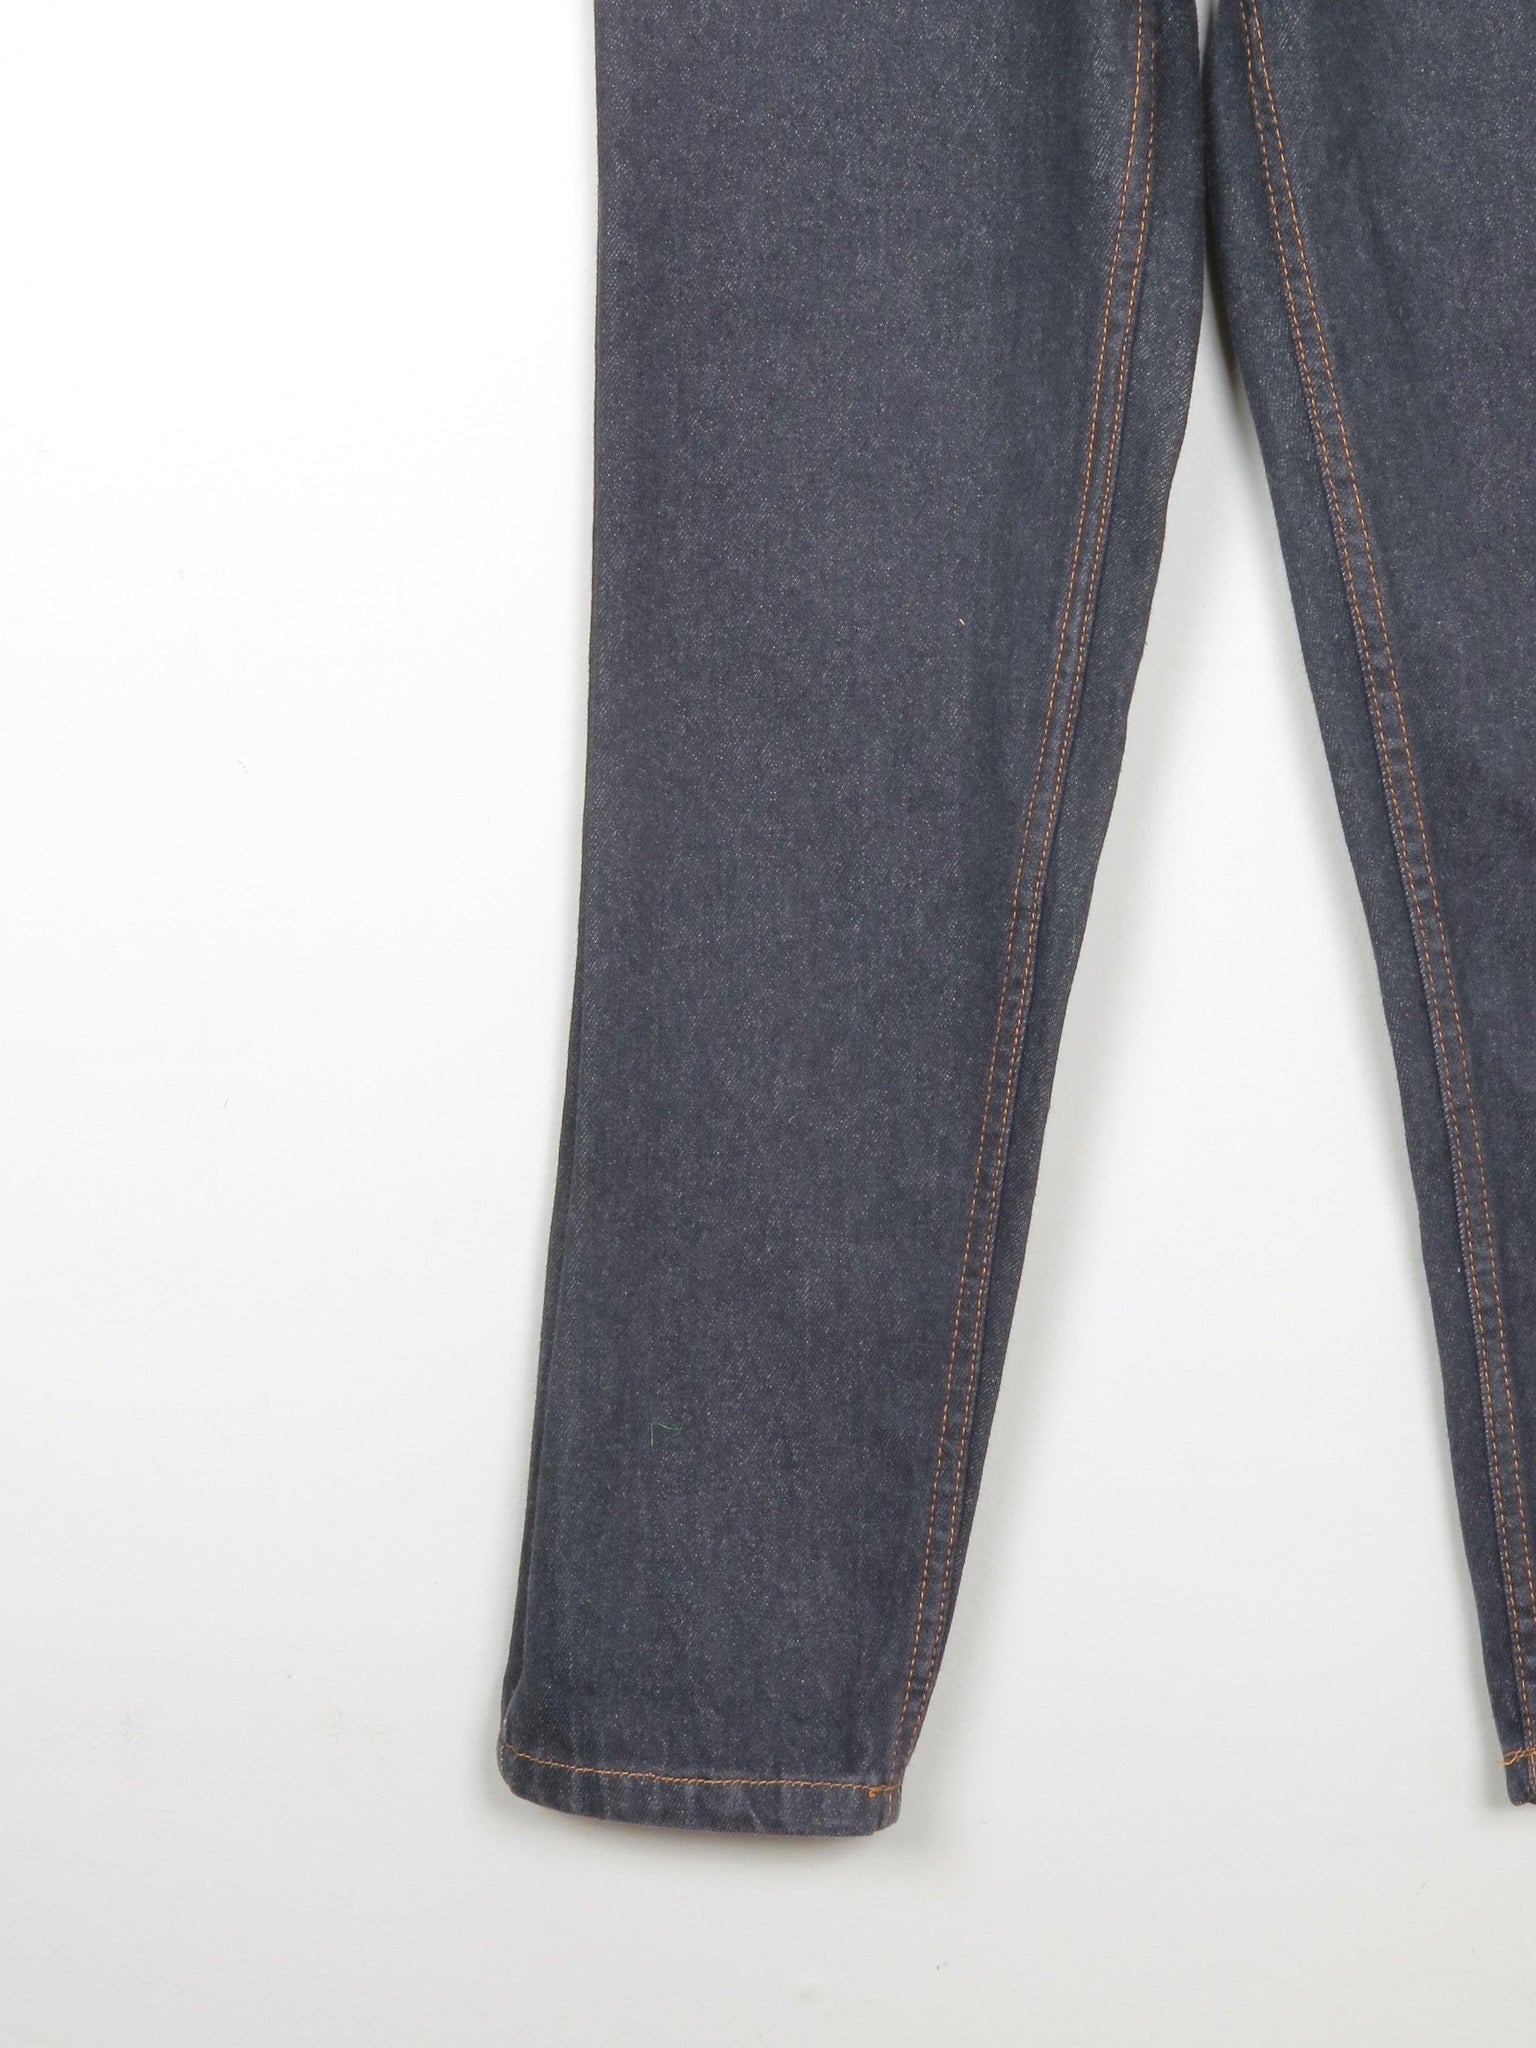 Women’s Dark Grey Vintage Fitted Jeans 8/10 28W - The Harlequin